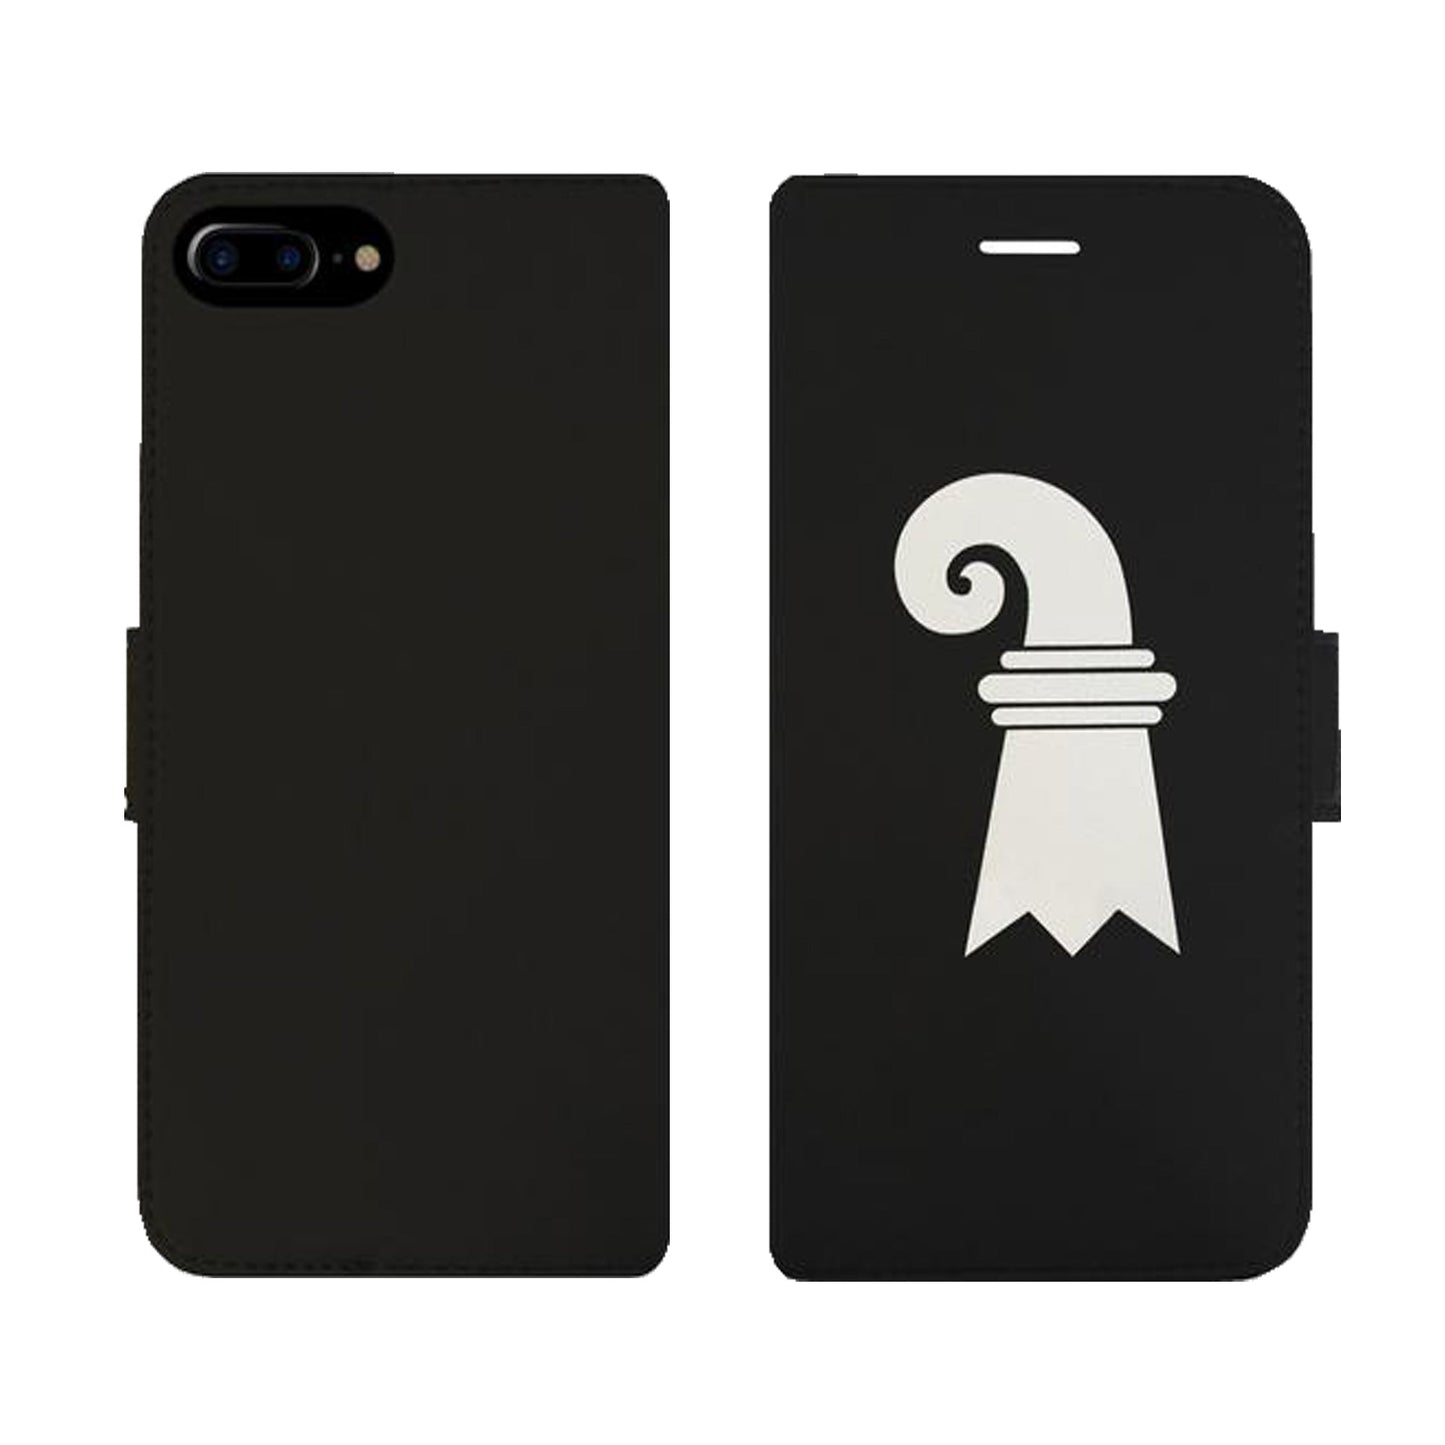 Coque Baslerstab Negative Victor pour iPhone 6/6S/7/8 Plus